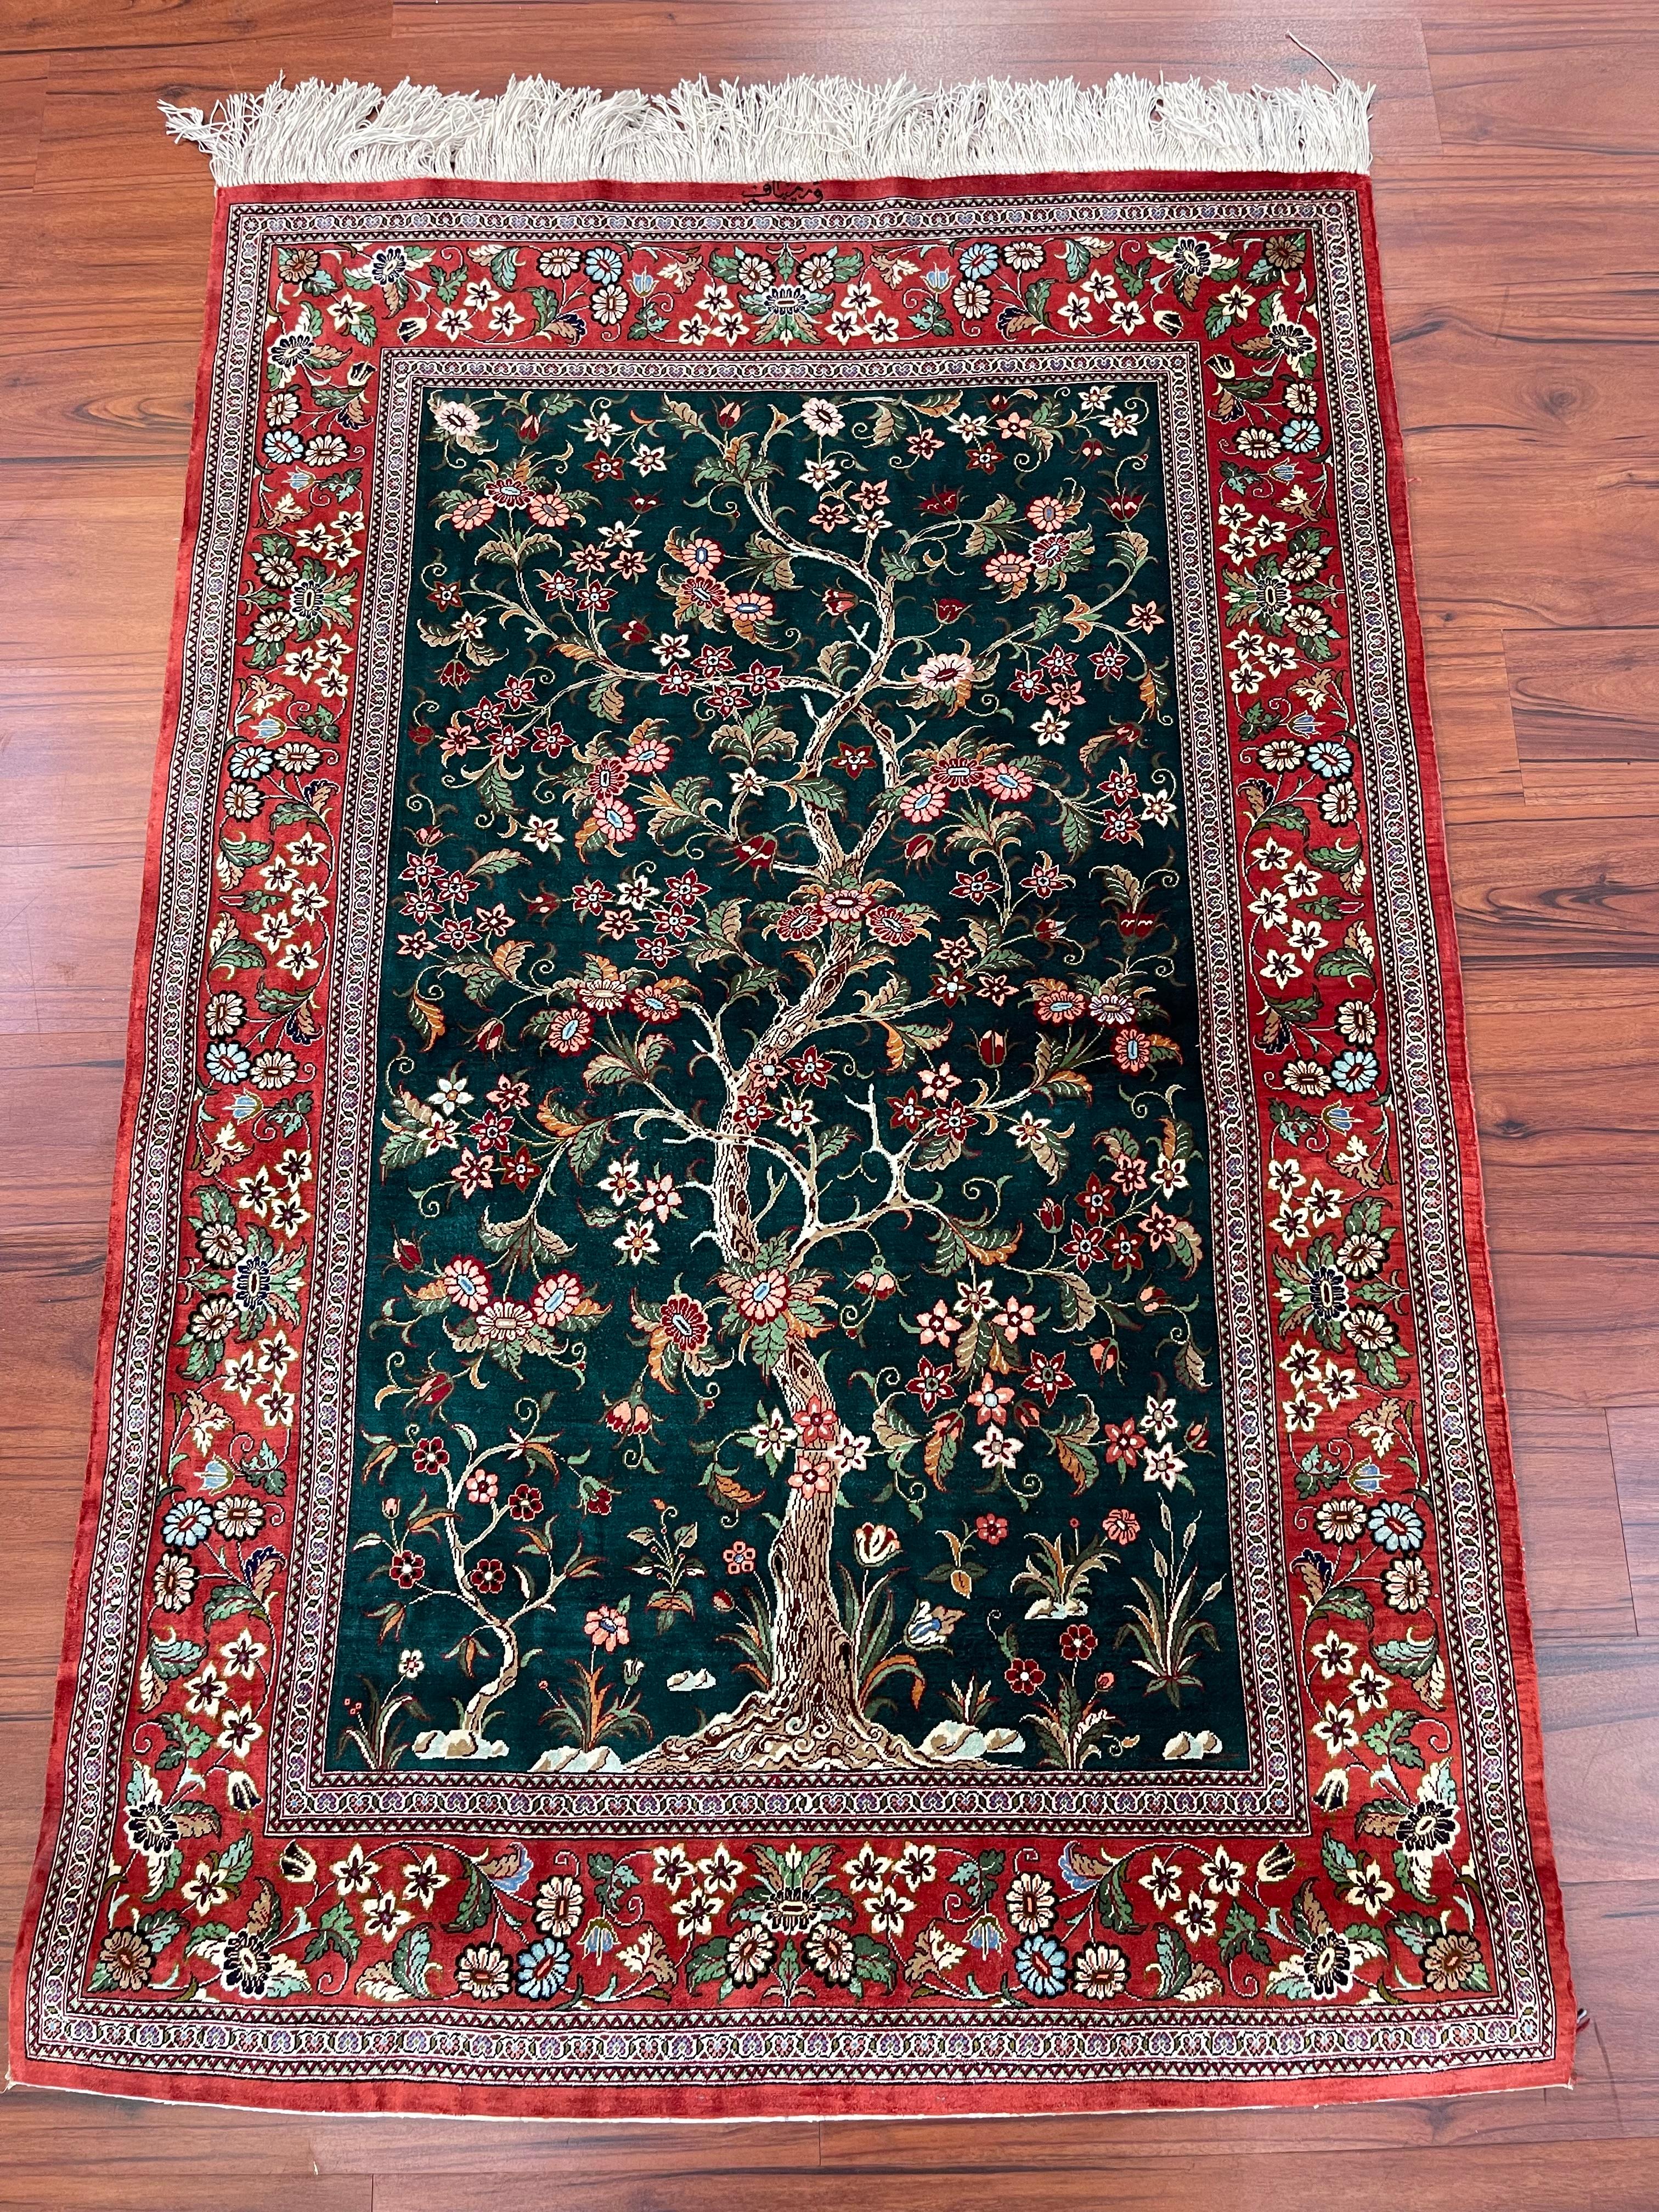 A stunning Extremely Fine Persian Silk Qum Tree of Life Rug. This beautiful 100% Silk rug is in excellent condition and originates from Iran in the late 20th century. 